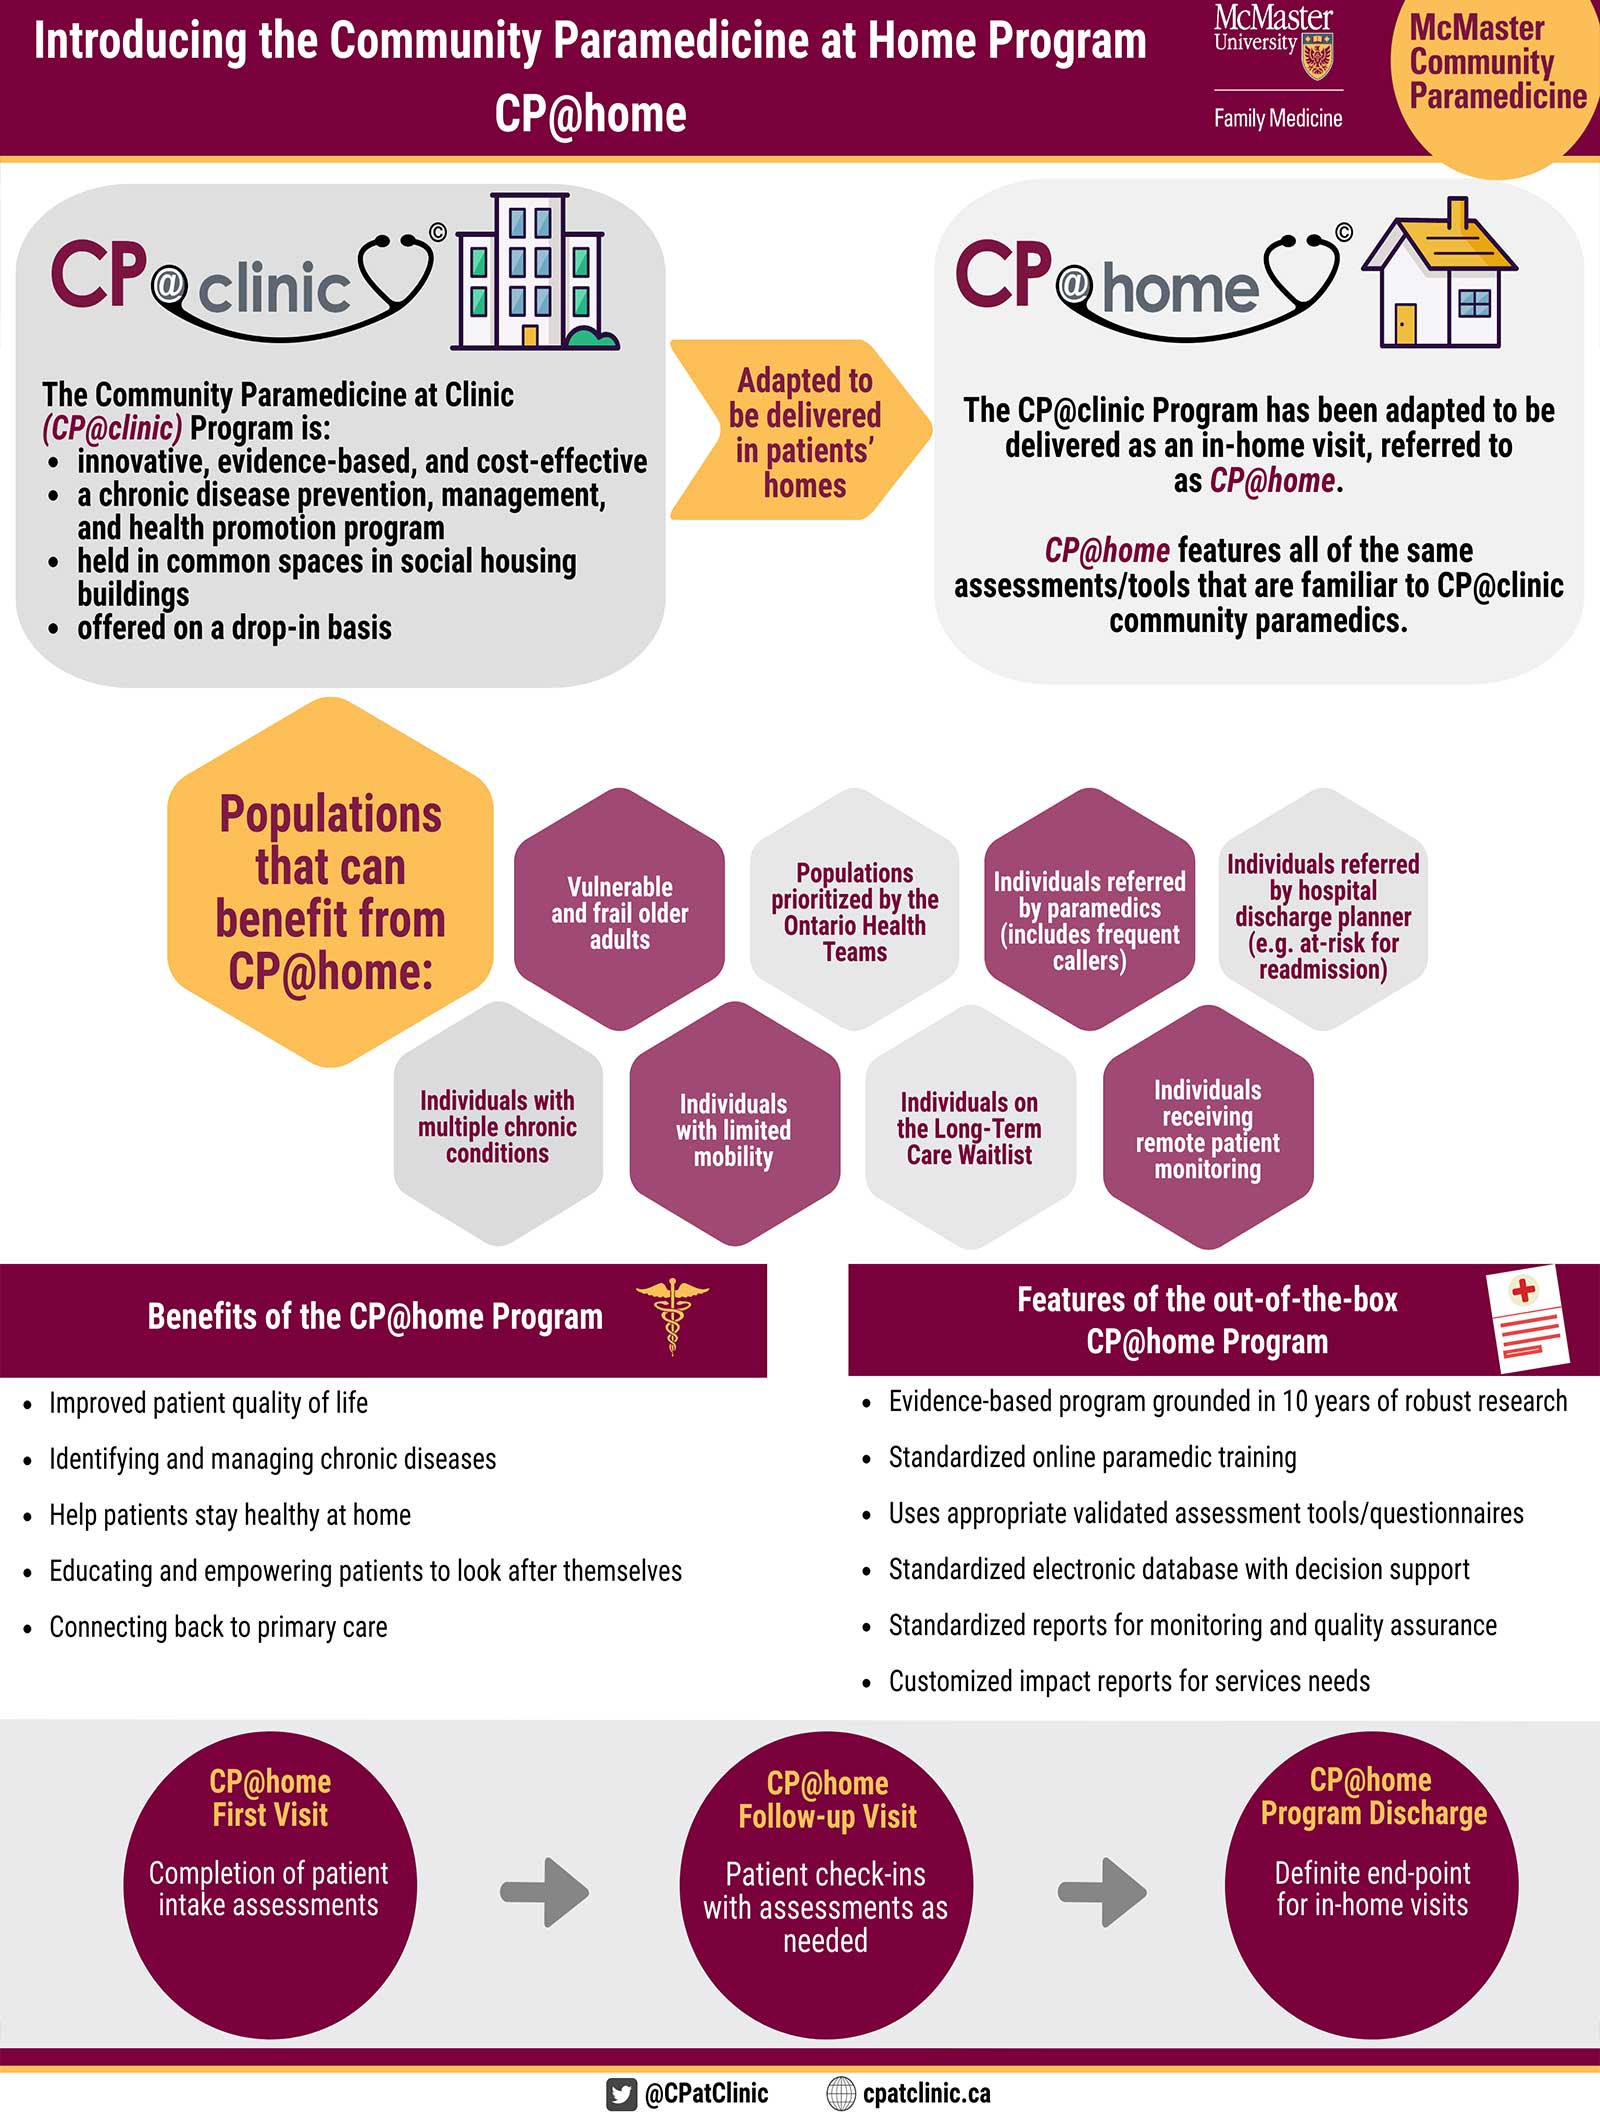 Infographic titled Introducing the community paramedicine at home program CP at home. The title banner includes the mcmaster department of family medicine logo and the mcmaster community paramedicine logo. The top left shows the CP at clinic logo next to an icon of an apartment building. Underneath that says the community paramedicine at clinic or Cp at clinic program is innovative, evidence based, and cost effective. A chronic disease prevention, management, and health promotion program. Held in common spaces in social housing buildings. Offered on a drop in basis. To the right of this blurb is an arrow pointing to the right that says adapted to be delivered in patients homes. To the right of the arrow is a similar blurb with the CP at home logo next to an icon of a house. Underneath this is text that says the CP at clinic program has been adapted to be delivered as an in home visit, referred to as CP at home. CP at home features all of the same assessments slash tools that are familiar to CP at clinic community paramedics. Underneath these blurbs is a series of interlocking hexagons shapes. The hexagon furthest to the left says populations that can benefit from CP at home. The following hexagons from left to right list the populations as individuals with multiple chronic conditions, vulnerable and frail older adults, individuals with limited mobility, populations prioritized by the Ontario Health Teams, individuals on the Long Term Care waitlist, individuals referred by paramedics which includes frequent callers, individuals receiving remote patient monitoring, and individuals referred by hospital discharge planner, for example at risk for readmission. To the bottom left of this is a list of benefits of the CP at home program which are improved patient quality of life, identifying and managing chronic diseases, help patients stay healthy at home, educating and empowering patients to look after themselves, and connecting back to primary care. To the right of this is a list of features of the out of the box CP at home program, which are evidence based program grounded in 10 years of robust research, standardized online paramedic training, uses appropriate validated assessment tools slash questionnaires, standardized electronic database with decision support, standardized reports for monitoring and quality assurance, and customized impact reports for services needs. Underneath benefits and features there are three bubbles with arrows pointing to the right between them. The bubble furthest to the left says CP at home first visit, completion of patient intake assessments. The middle bubble says CP at home follow up visit, patient check ins with assessments as needed. The bubble on the right says CP at home program discharge, definite end point for in home visits. At the bottom is the Twitter handle at CP at clinic, and website cp at clinic dot CA.